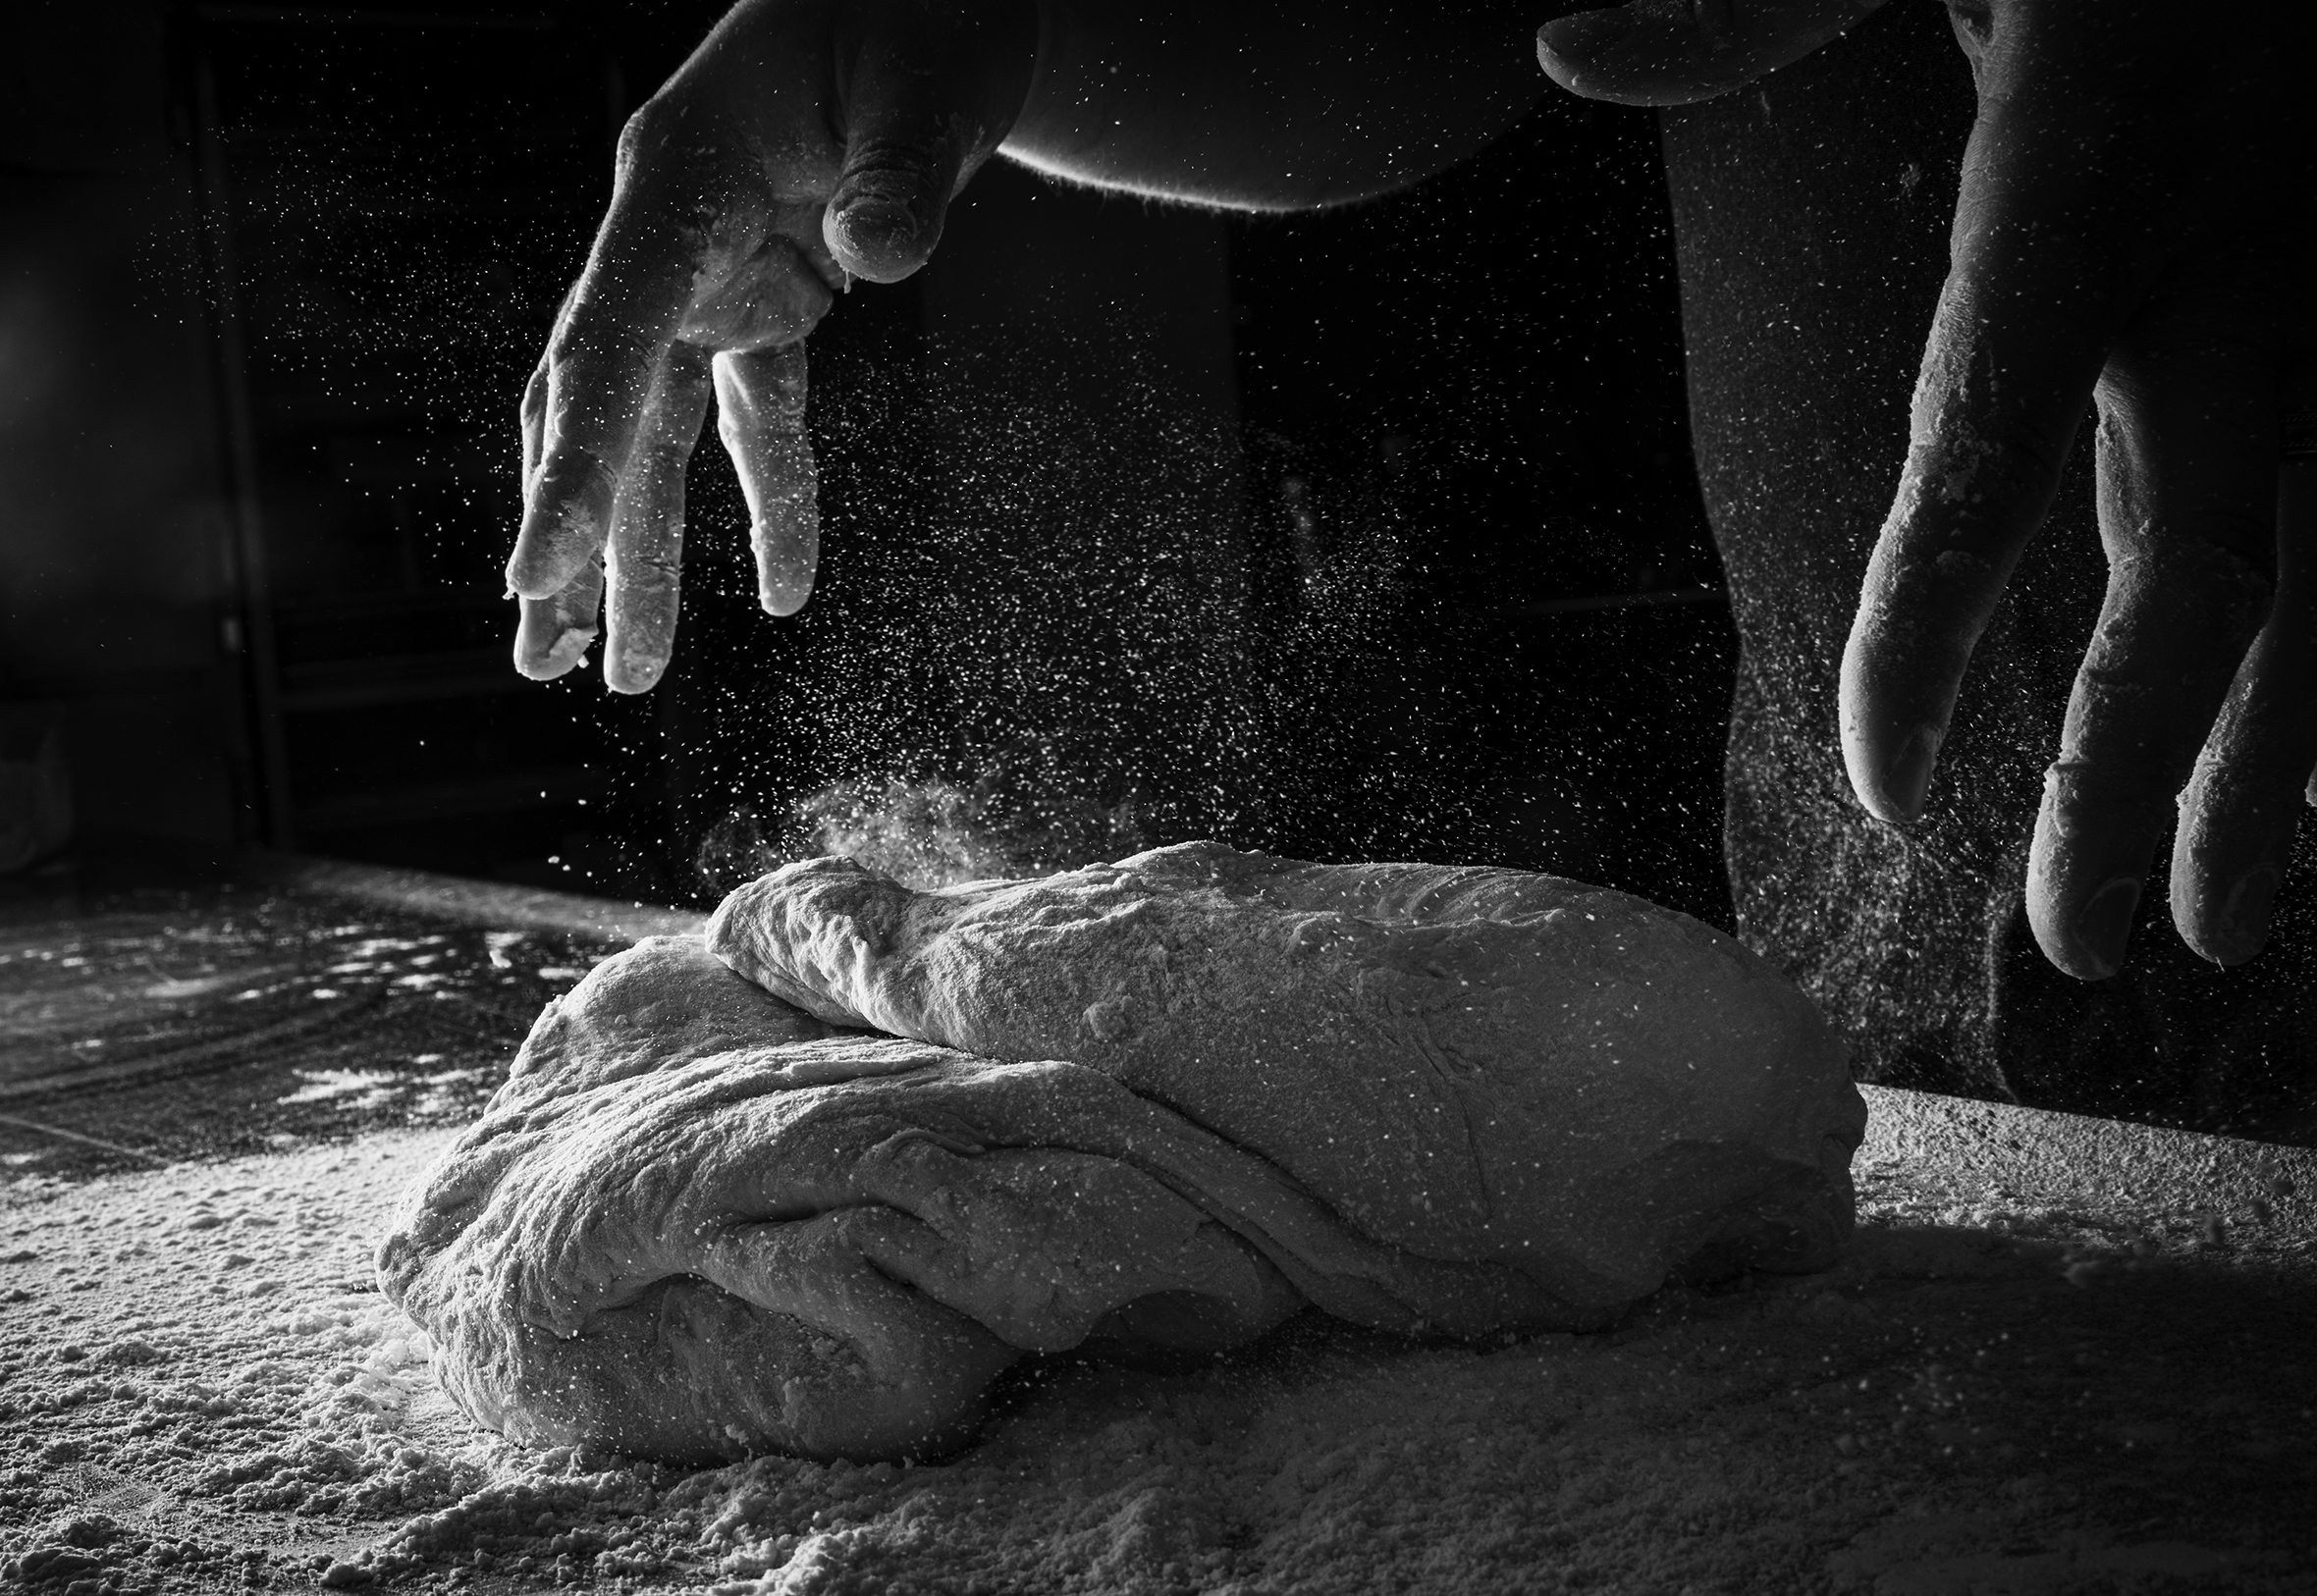 A close-up of a person's hands throwing dough onto a floured table.